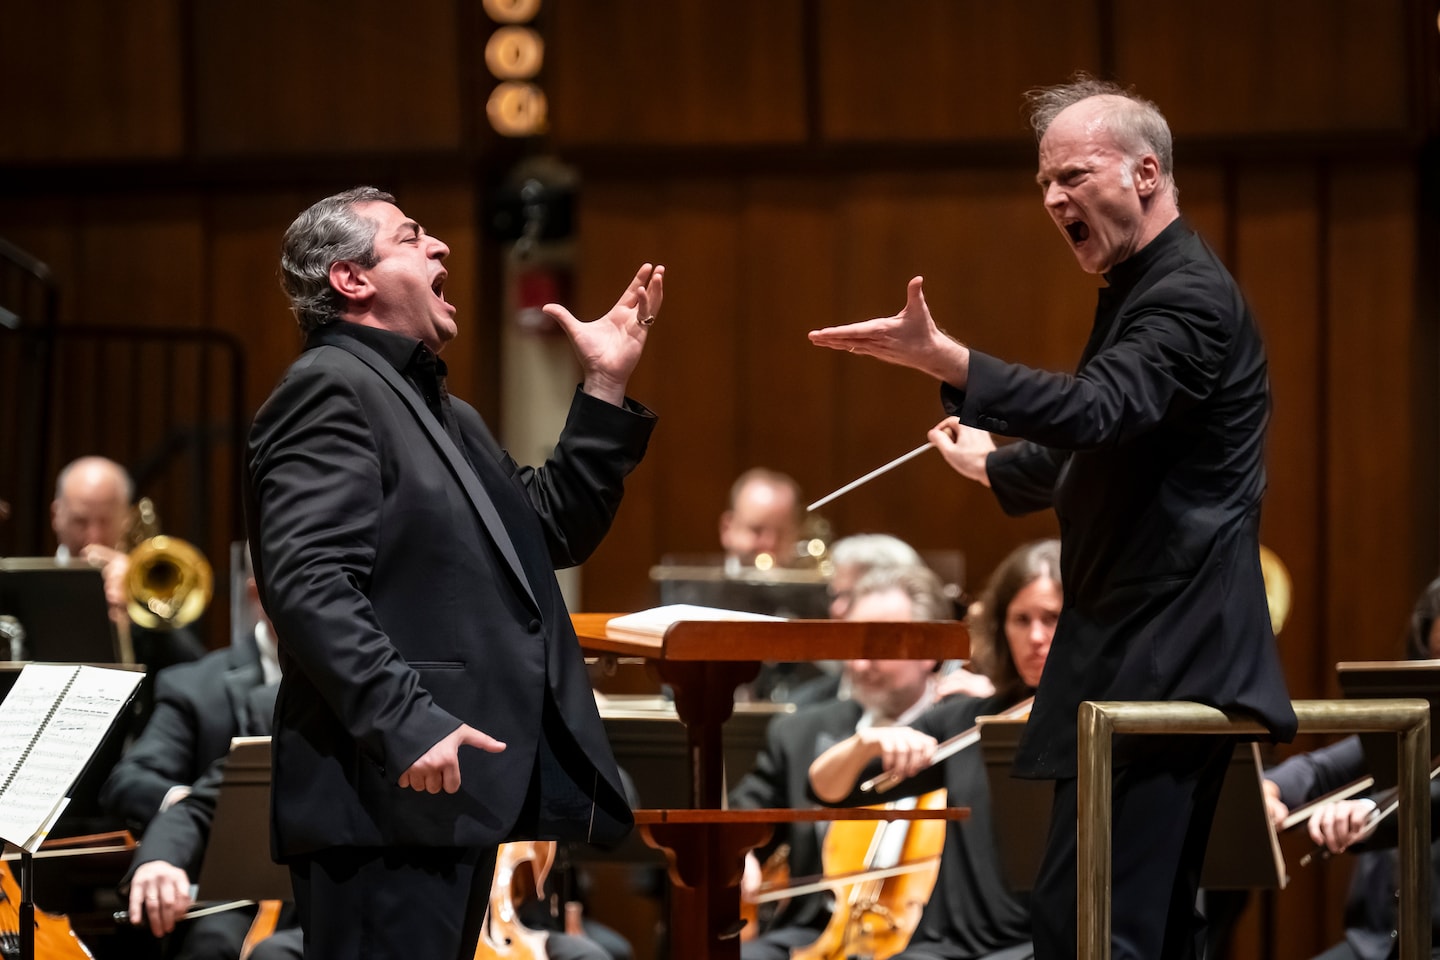 NSO inaugurates ‘Opera in Concert’ series with an electric ‘Otello’